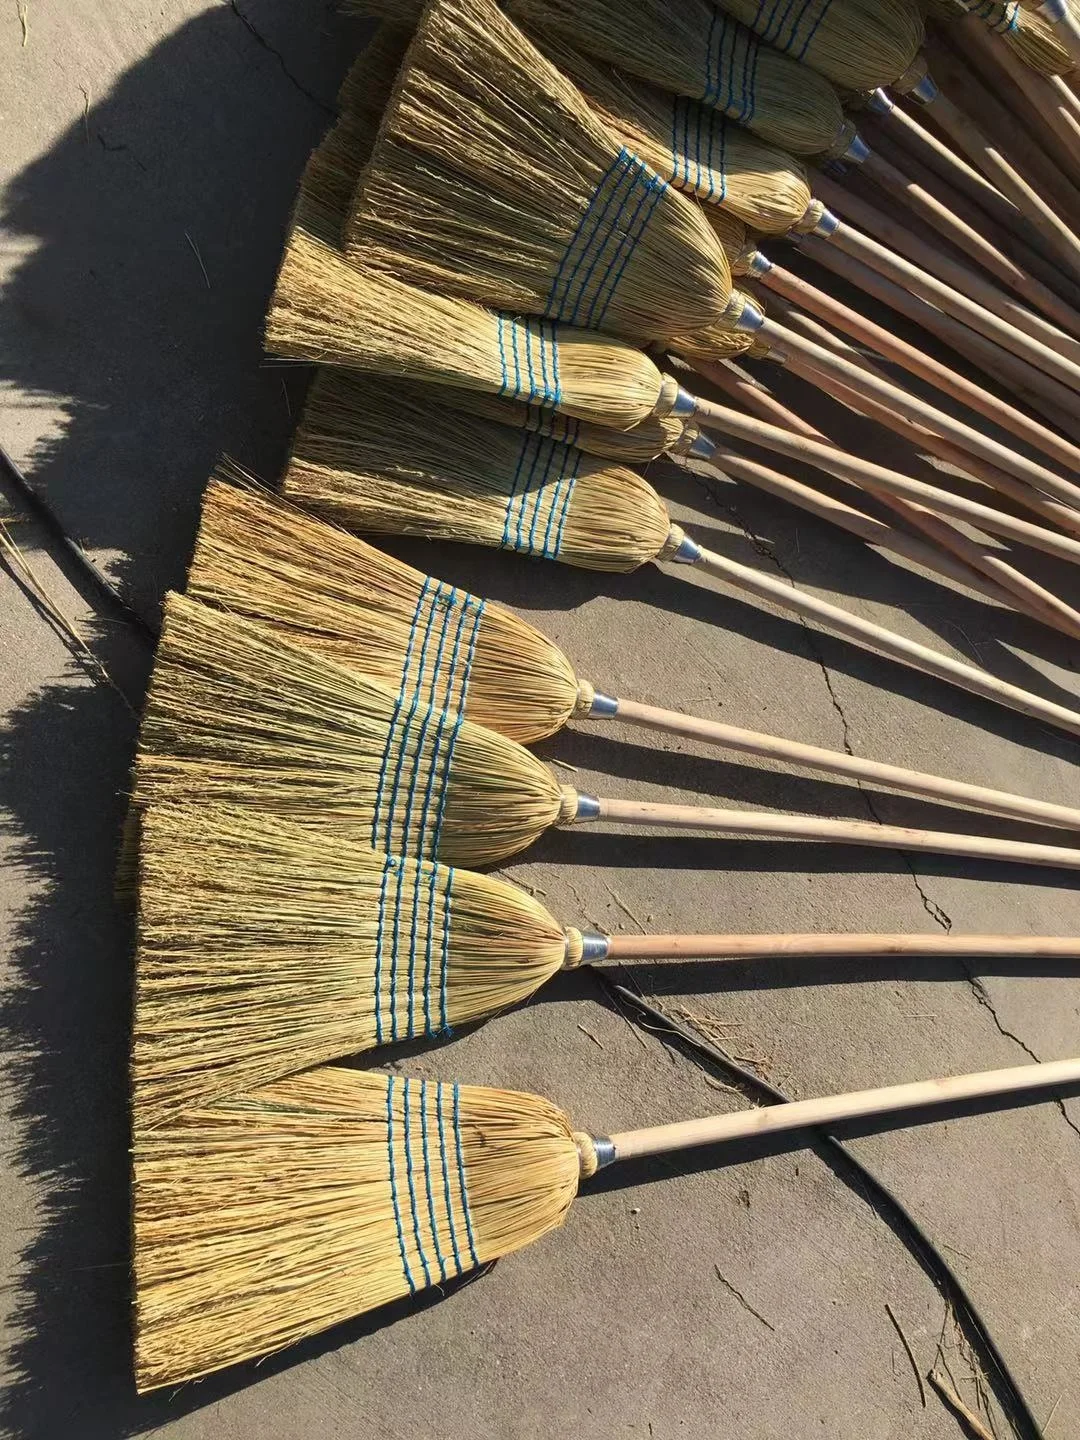 Heavy-Duty Broom Corn Broom Outdoor Commercial Indoor Perfect for Courtyard Garage Lobby Mall Market Floor Home Office Leaves